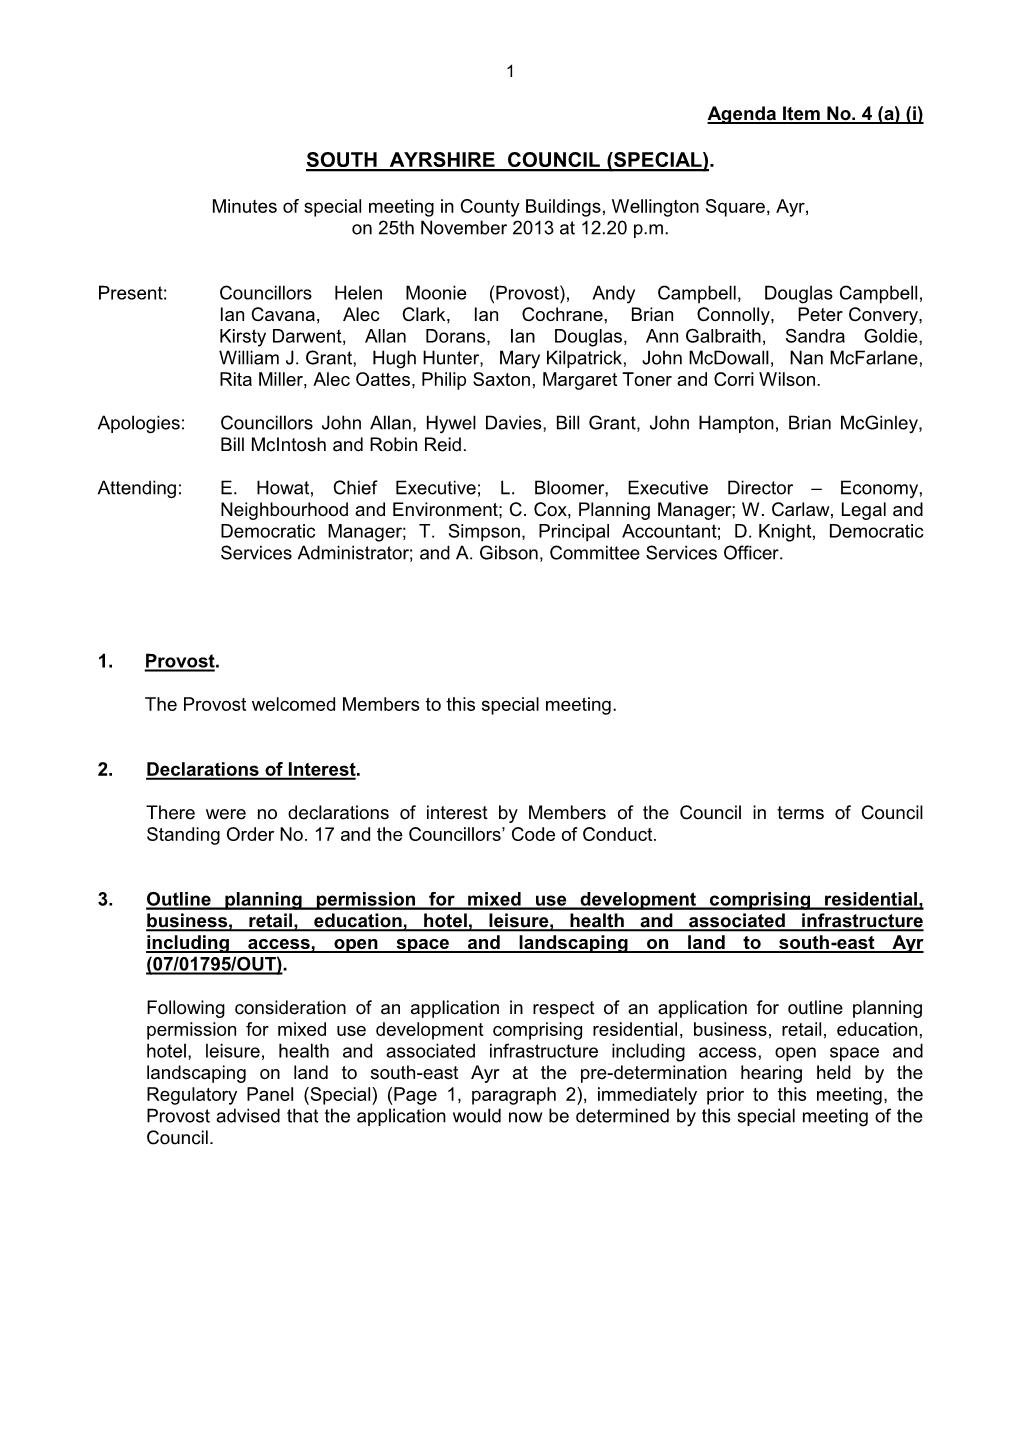 Minutes of Special Meeting in County Buildings, Wellington Square, Ayr, on 25Th November 2013 at 12.20 P.M